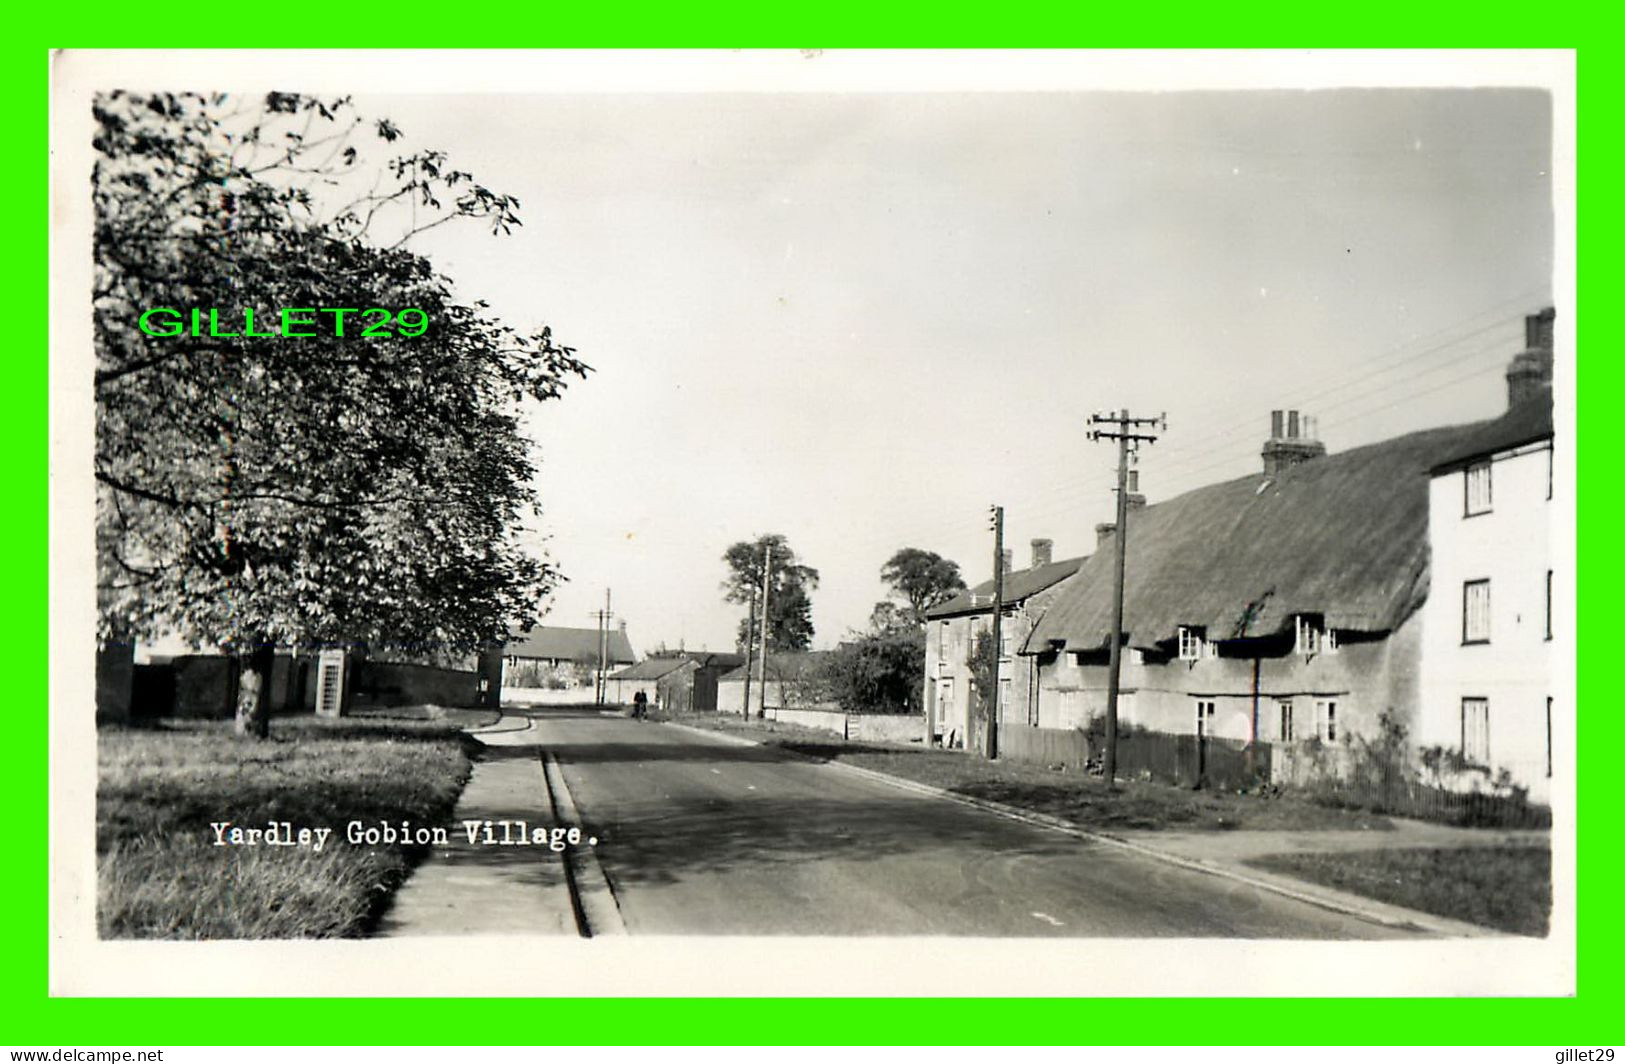 YARDLEY GOBION, NORTHAMPTONSHIRE, UK - VIEW OF THE VILLAGE - REAL PHOTOGRAPH - TRAVEL IN 1962 - - Northamptonshire